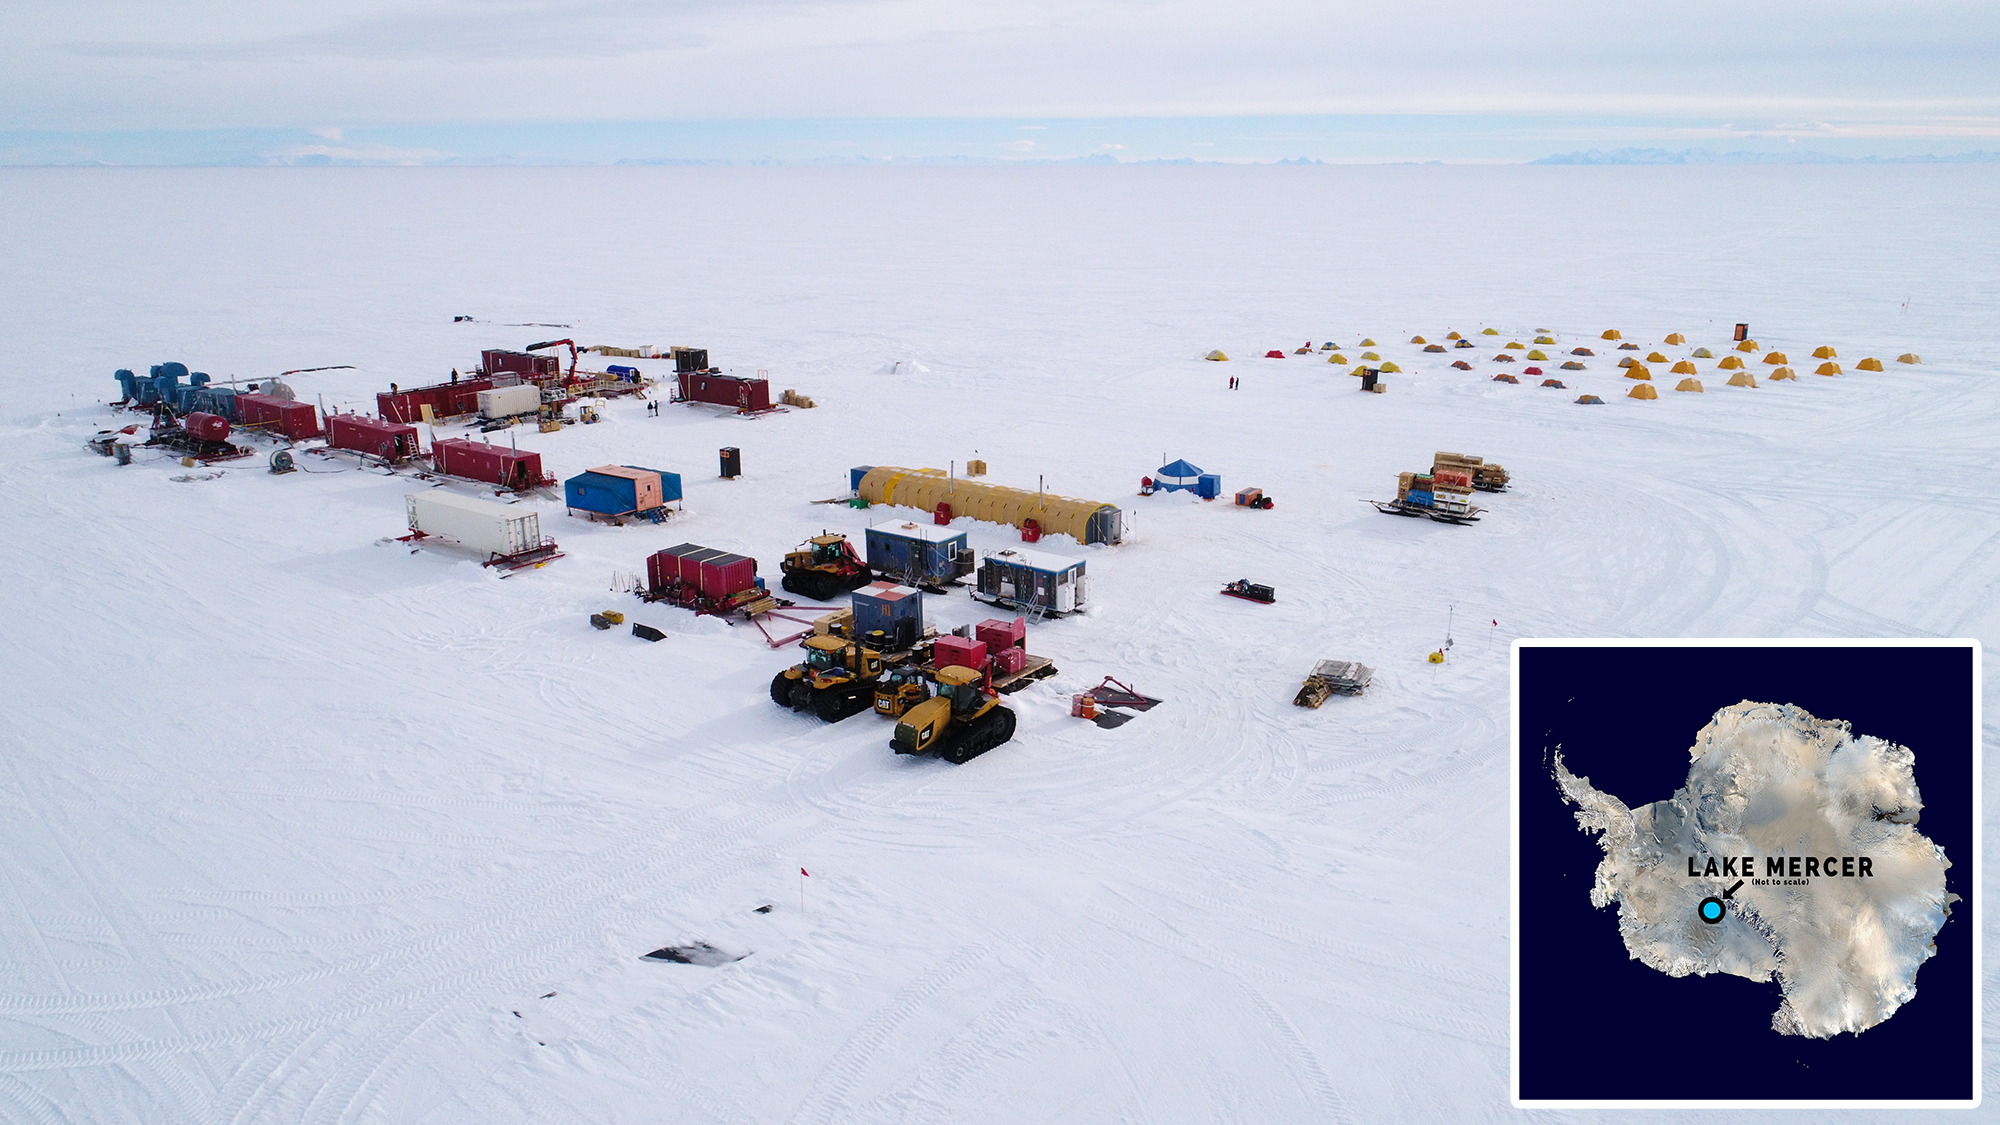 INNER IMAGE: Mercer Lake is a few hundred miles from the South Pole. OUTER IMAGE: Drone view of the historic expedition from Dec 2018 – Jan 2019 when researchers accessed a subglacial lake for only the second time in history and retrieved the longest sediment core from a subglacial lake. Credit: Billy Collins.